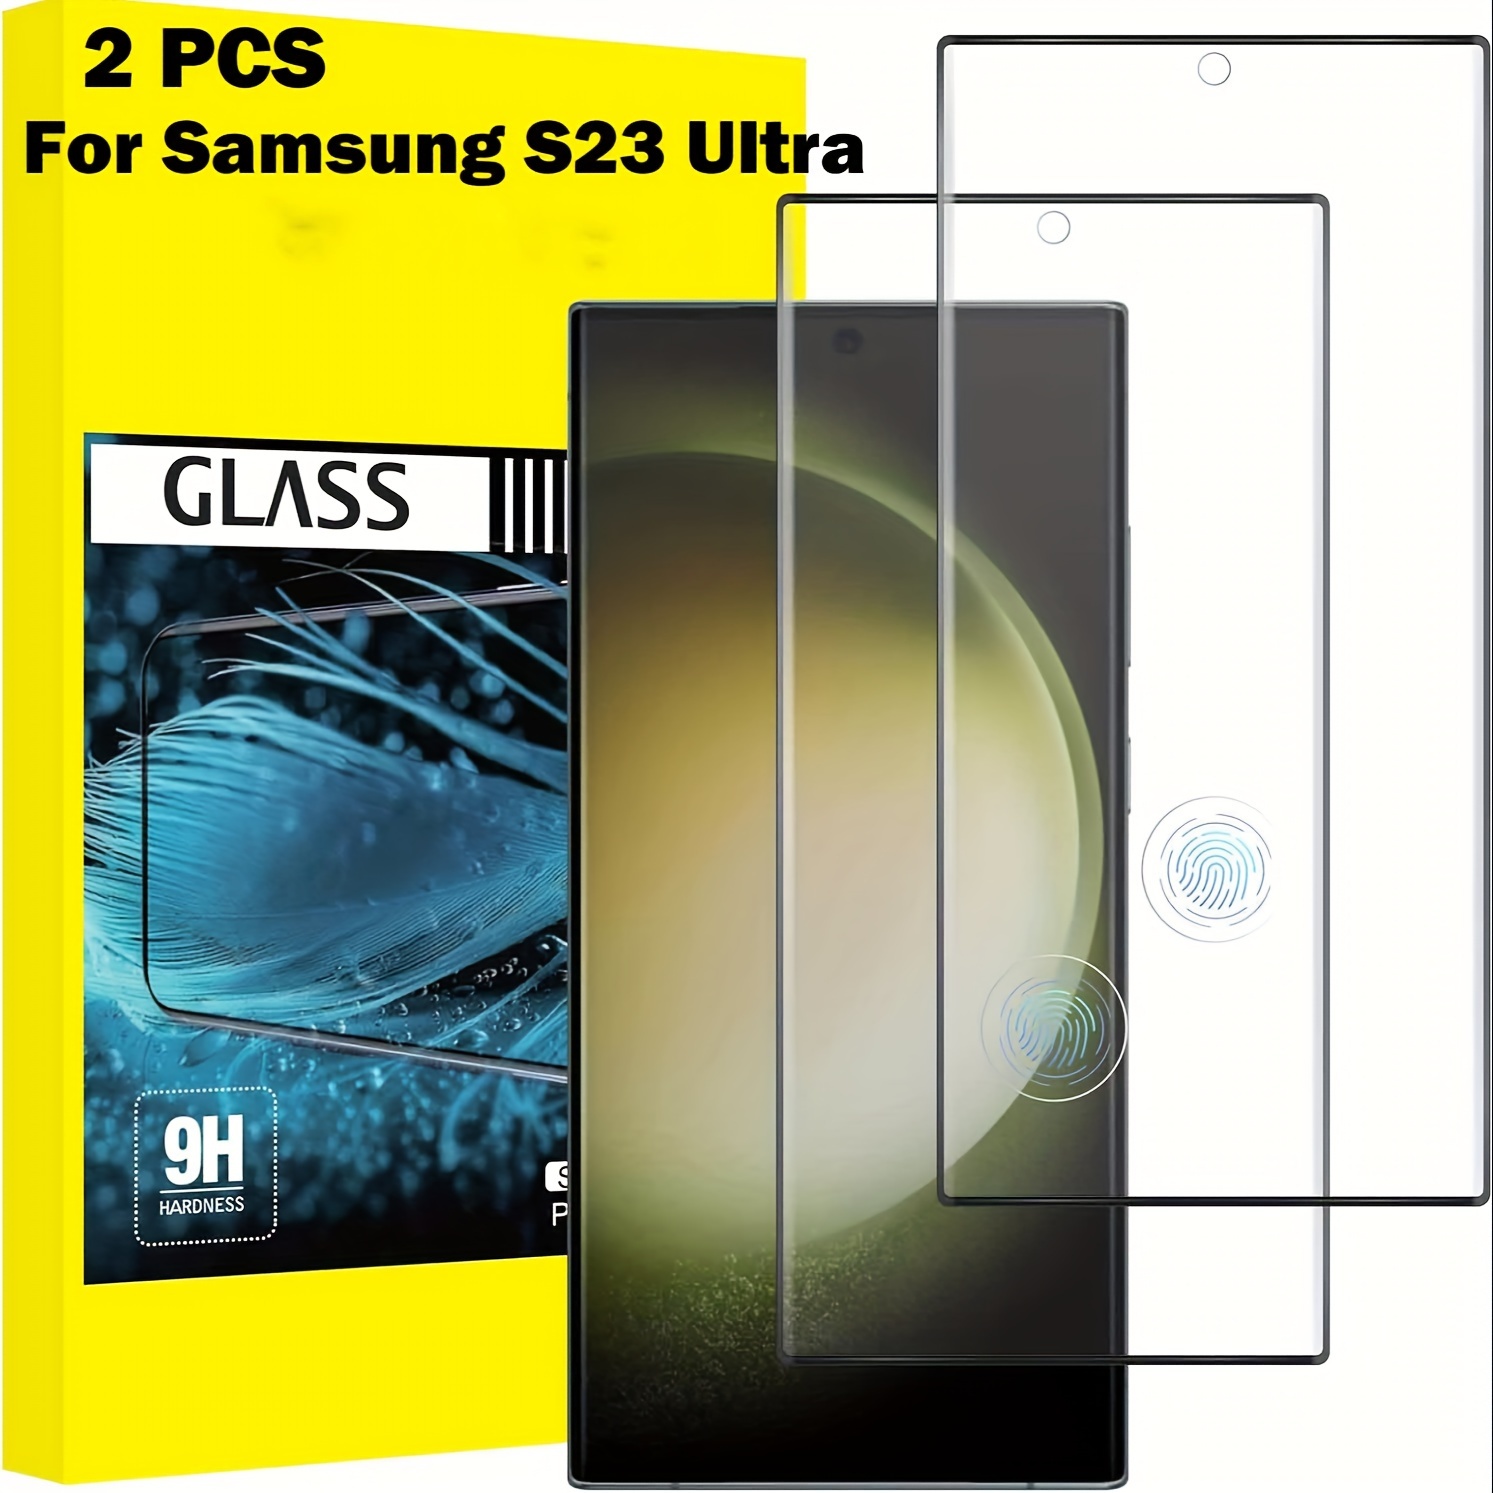 Protective glass film for Samsung Galaxy S23 Ultra